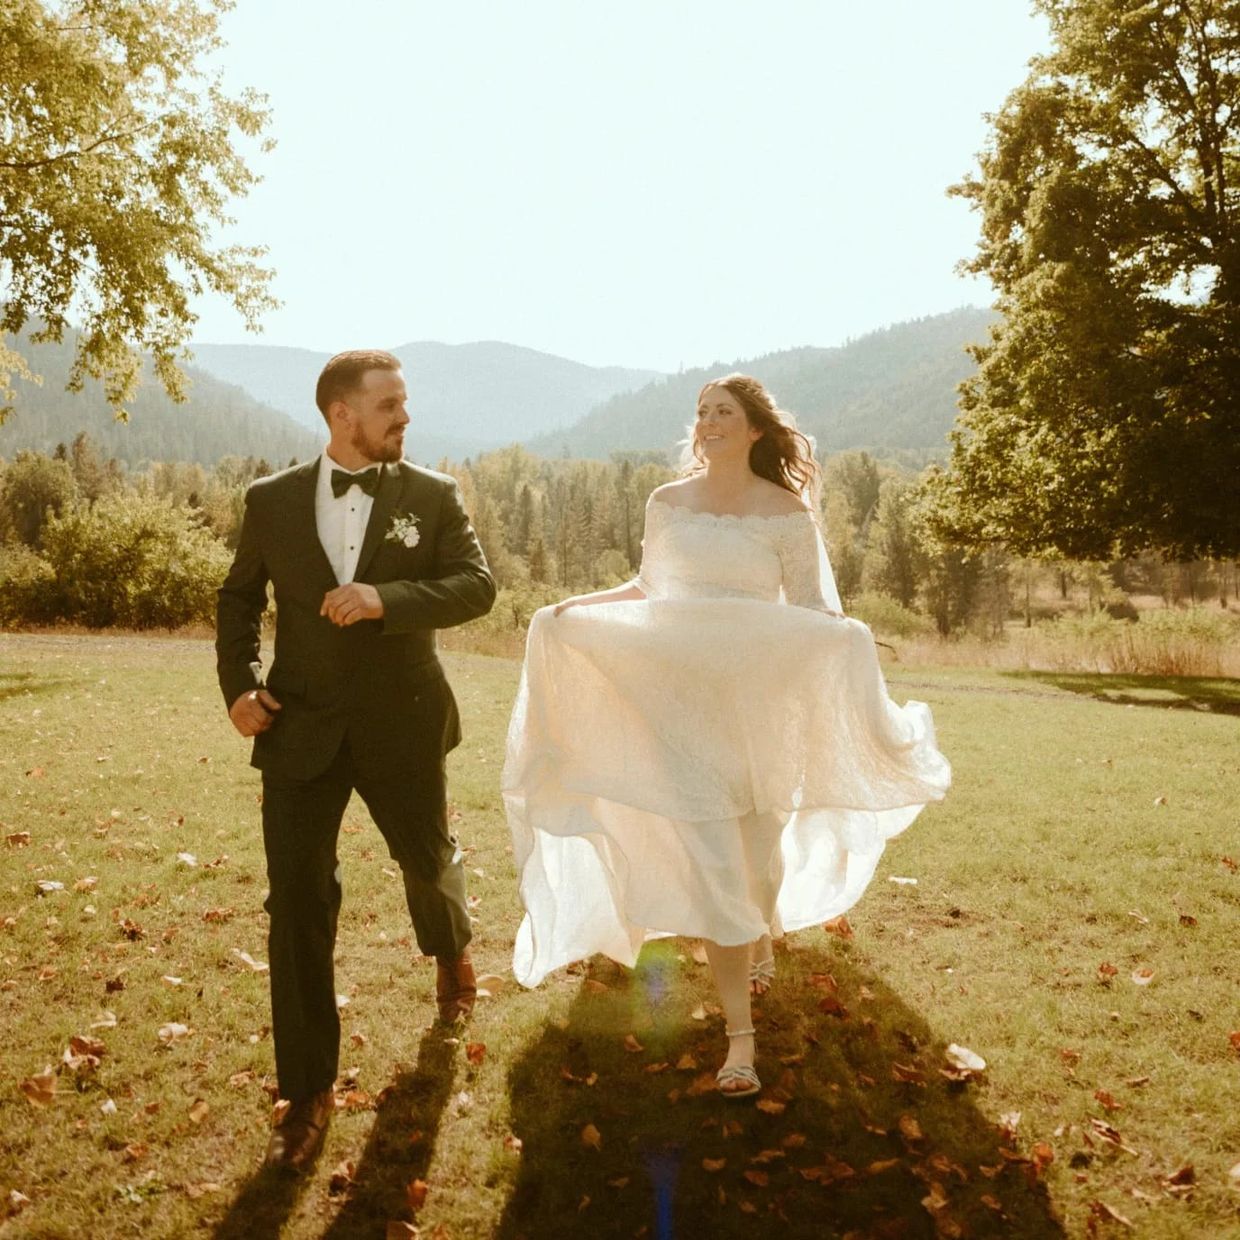 Groom and bride walking outside near trees with mountains in the background in northern Idaho.